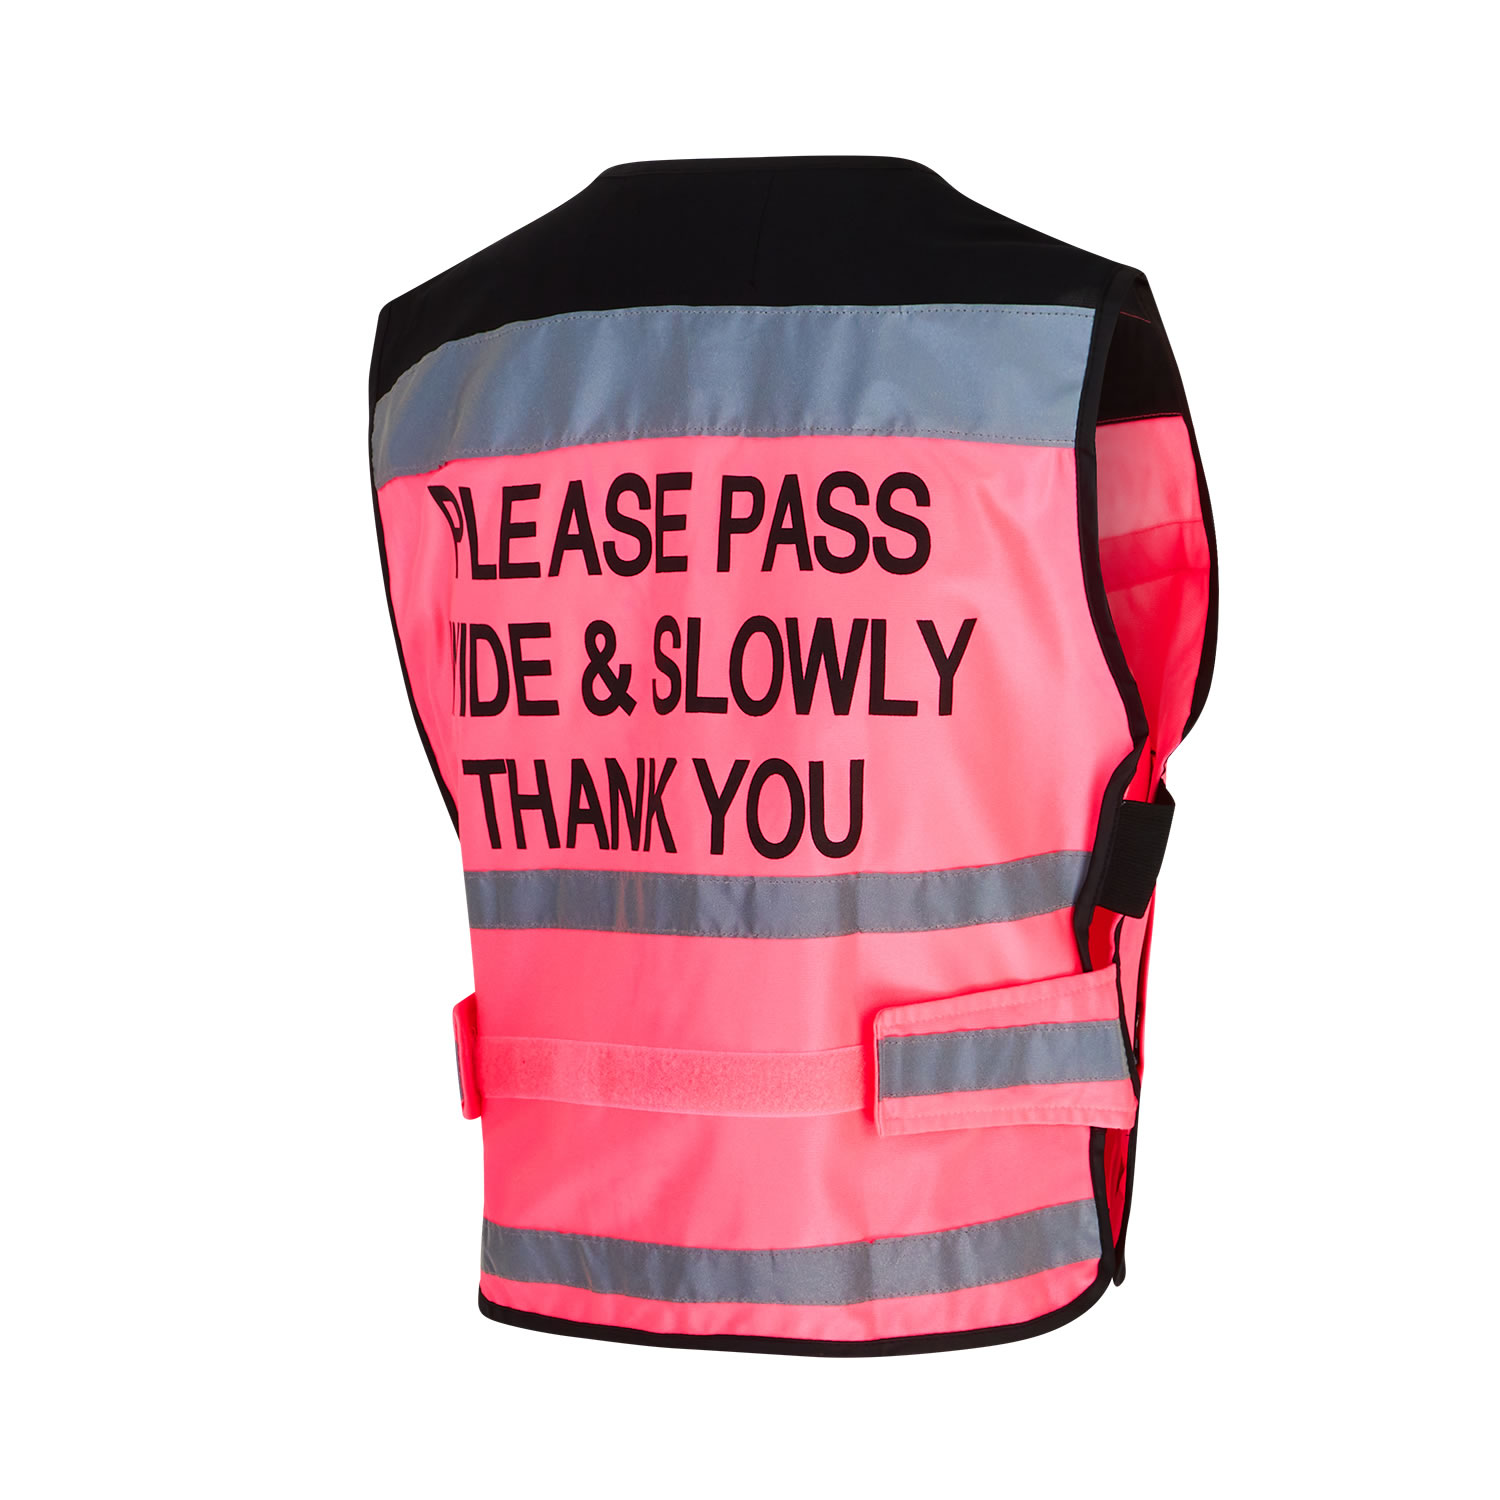 EQUISAFETY AIR WAISTCOAT PLEASE PASS WIDE & SLOWLY PINK